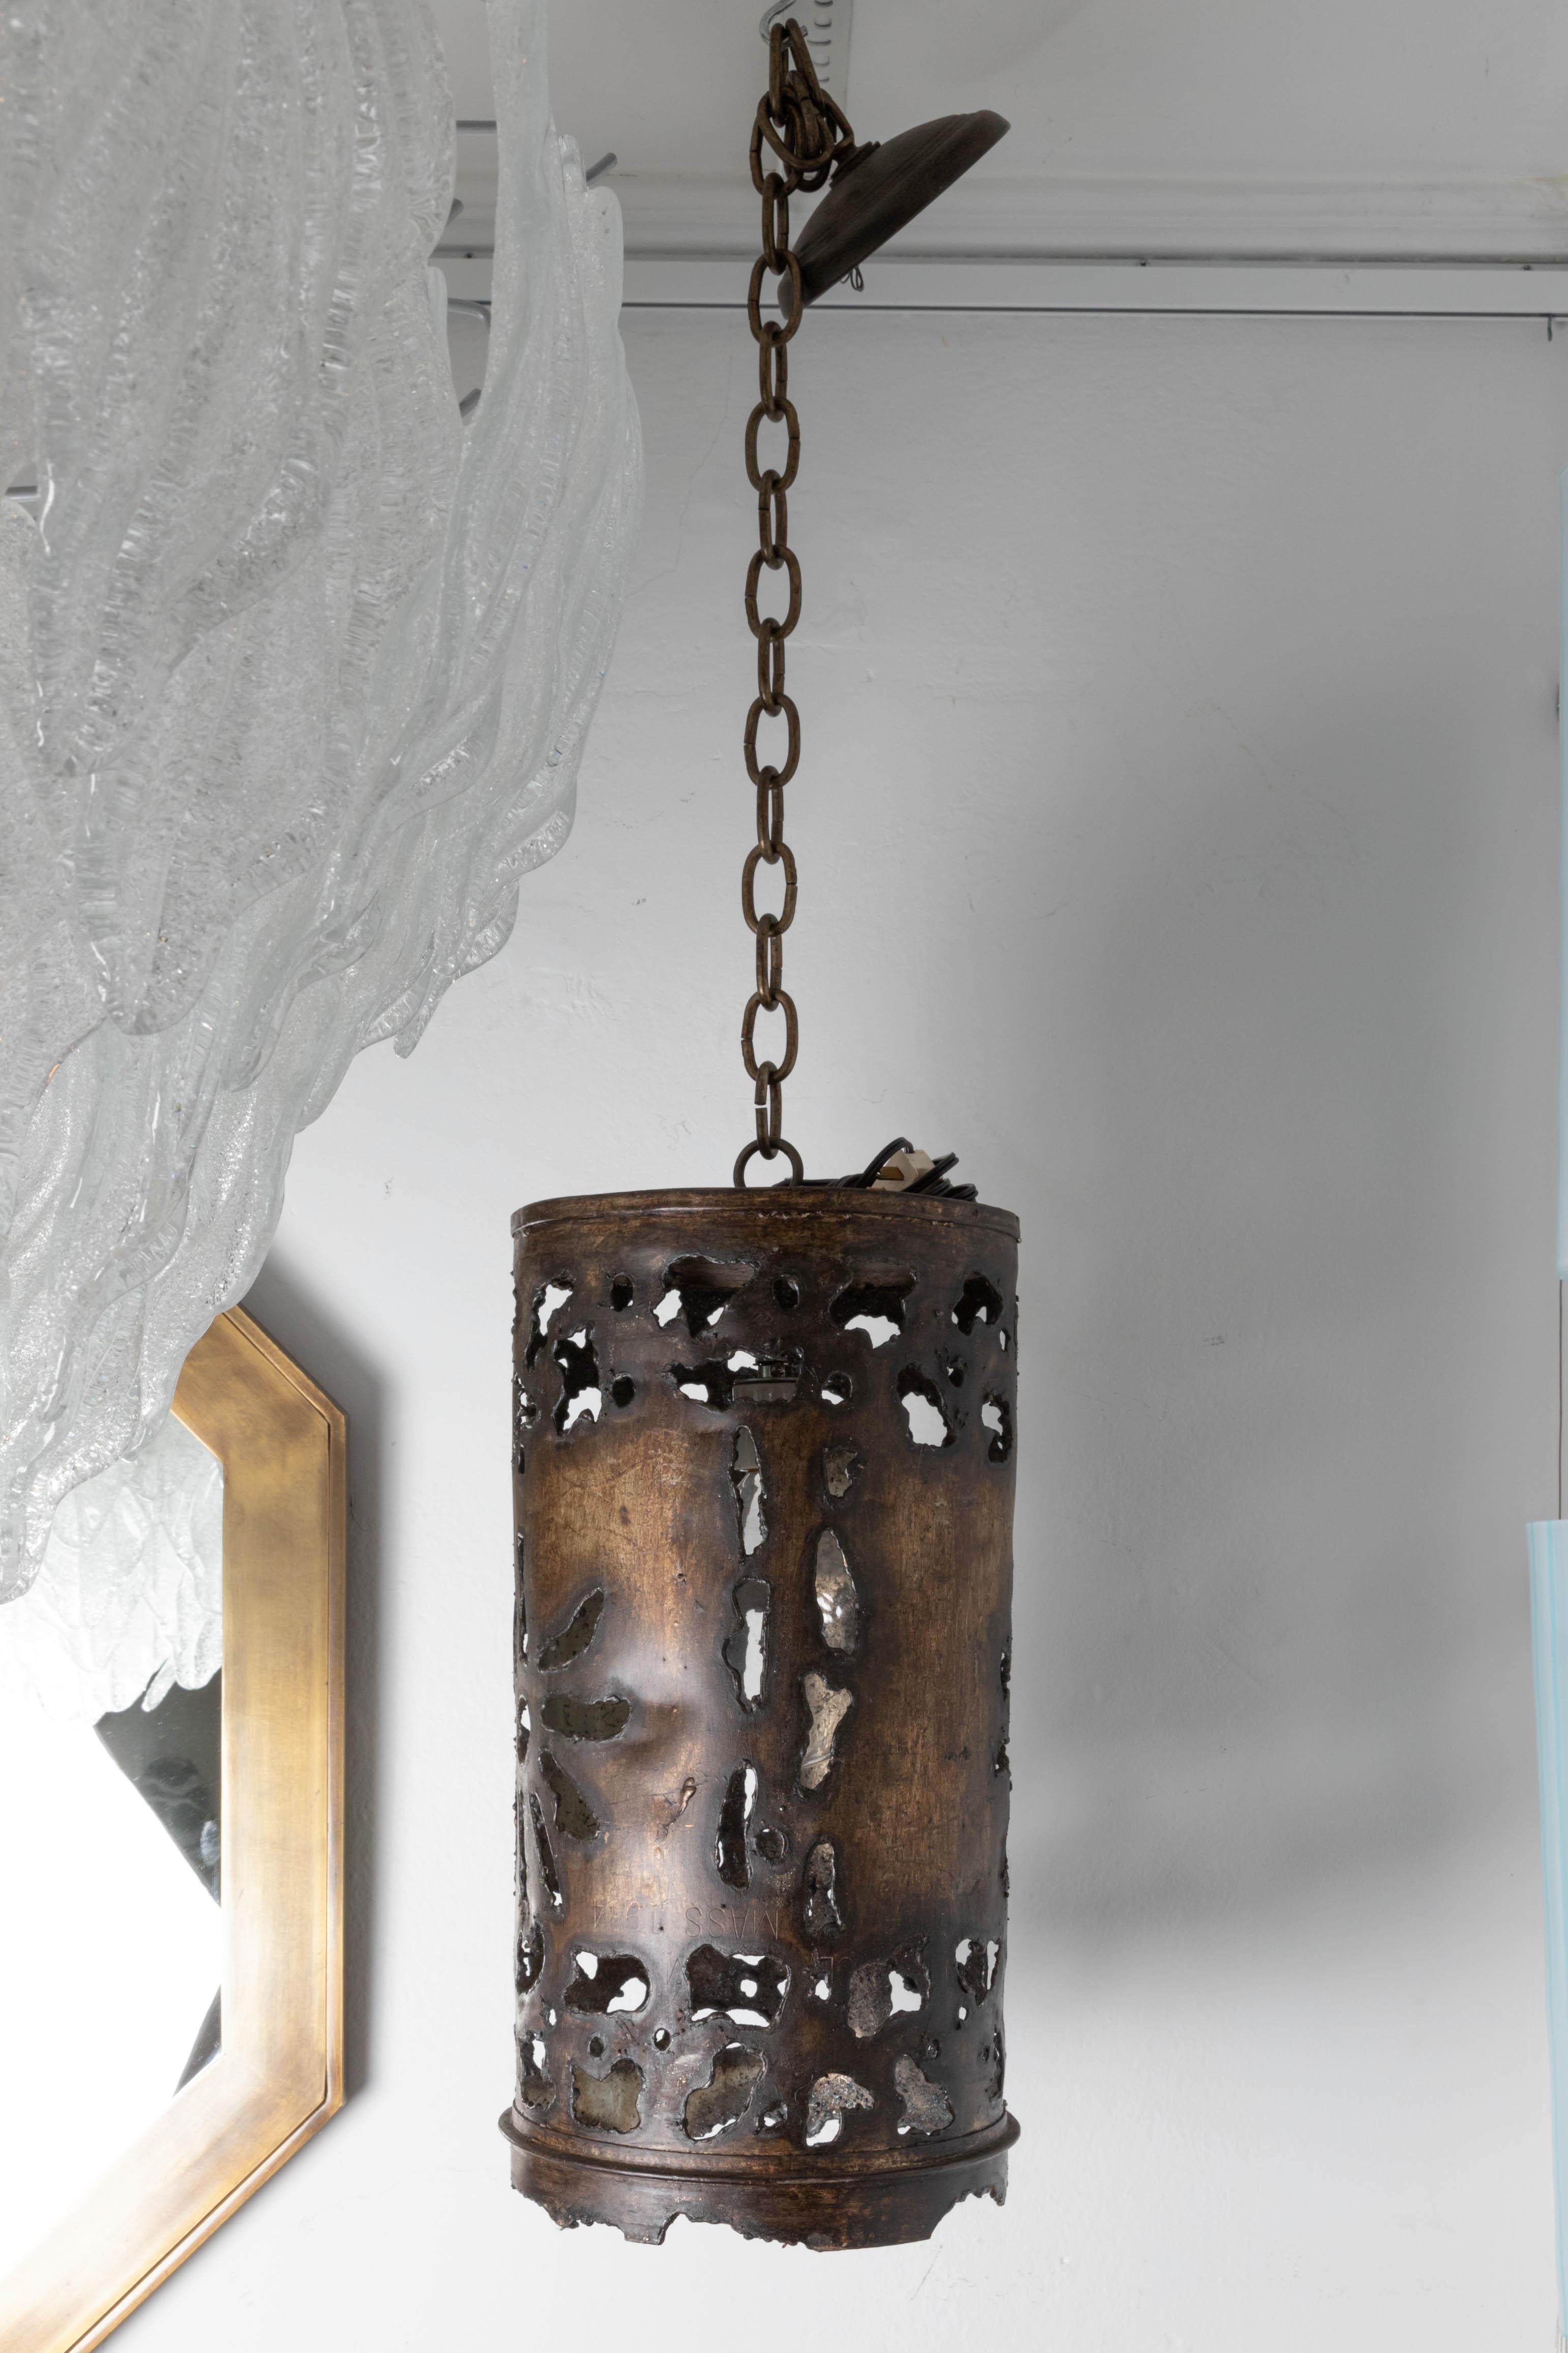 Brutalist steel sculptural pendant
Total height with canopy and chain is 43